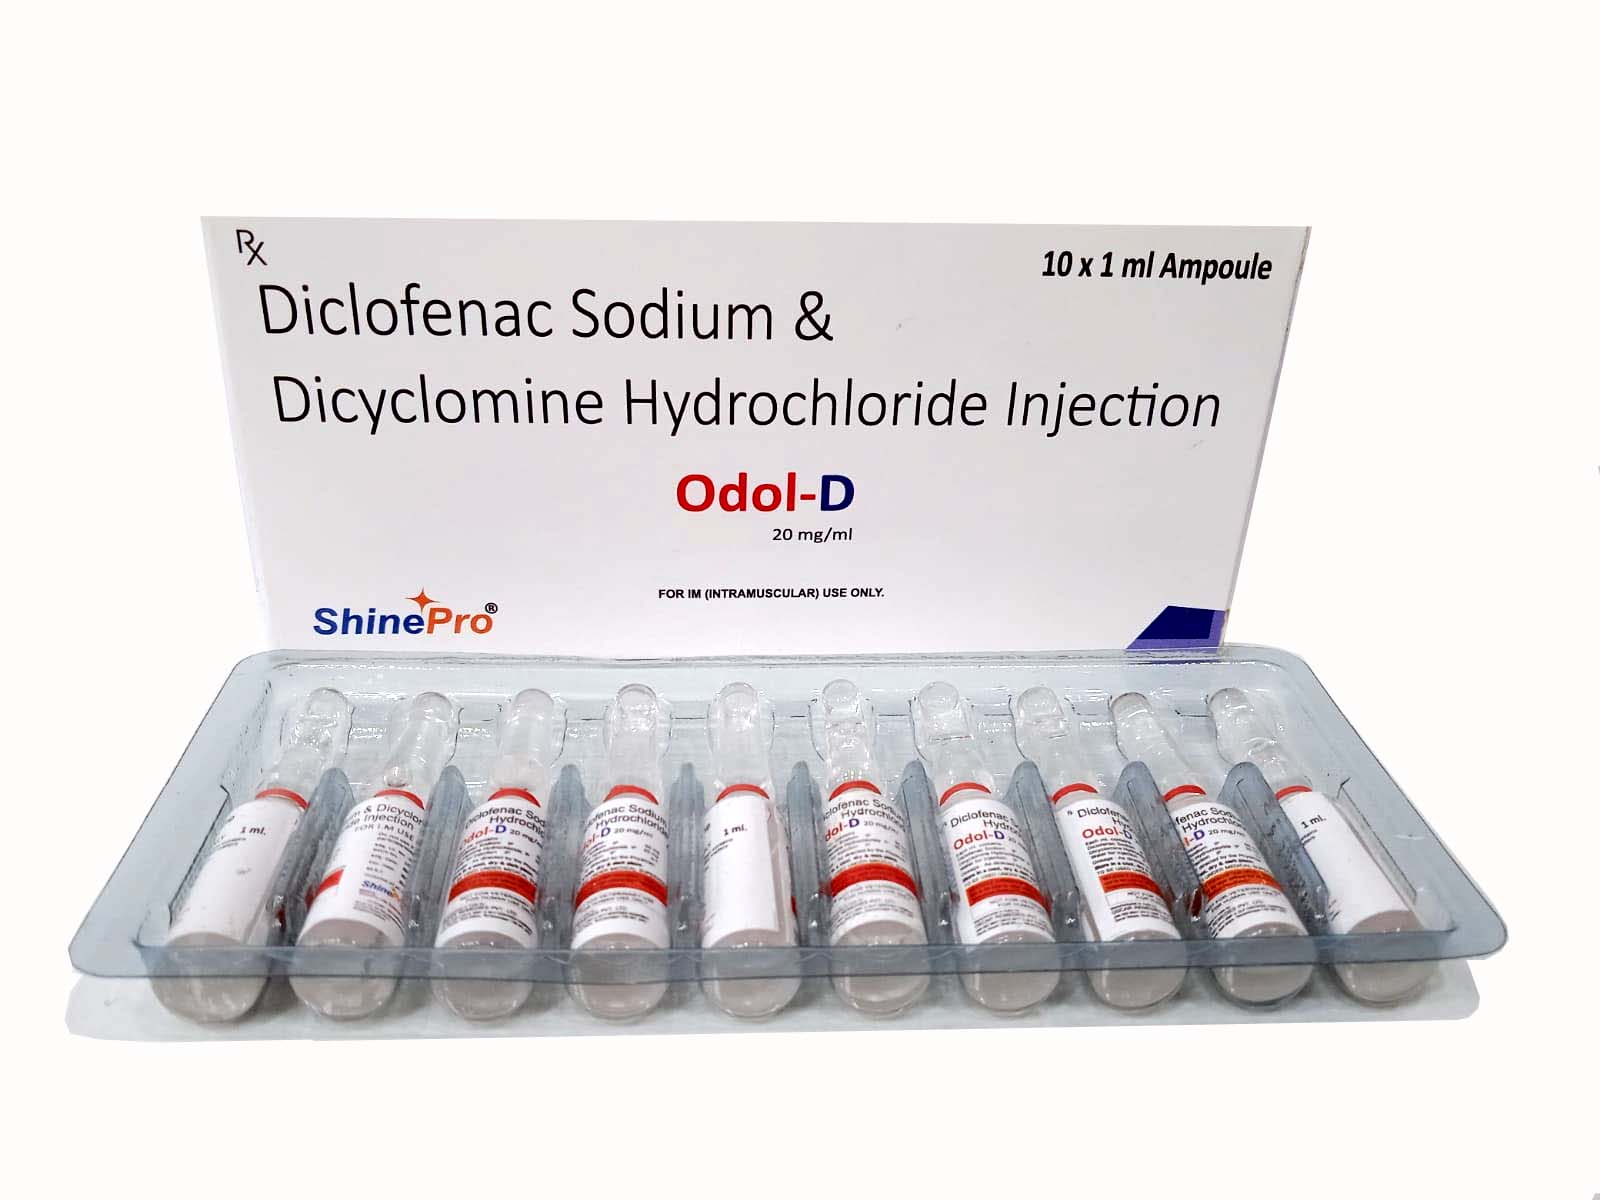 Diclofenac and Dicyclomine Hydrochloride Injection